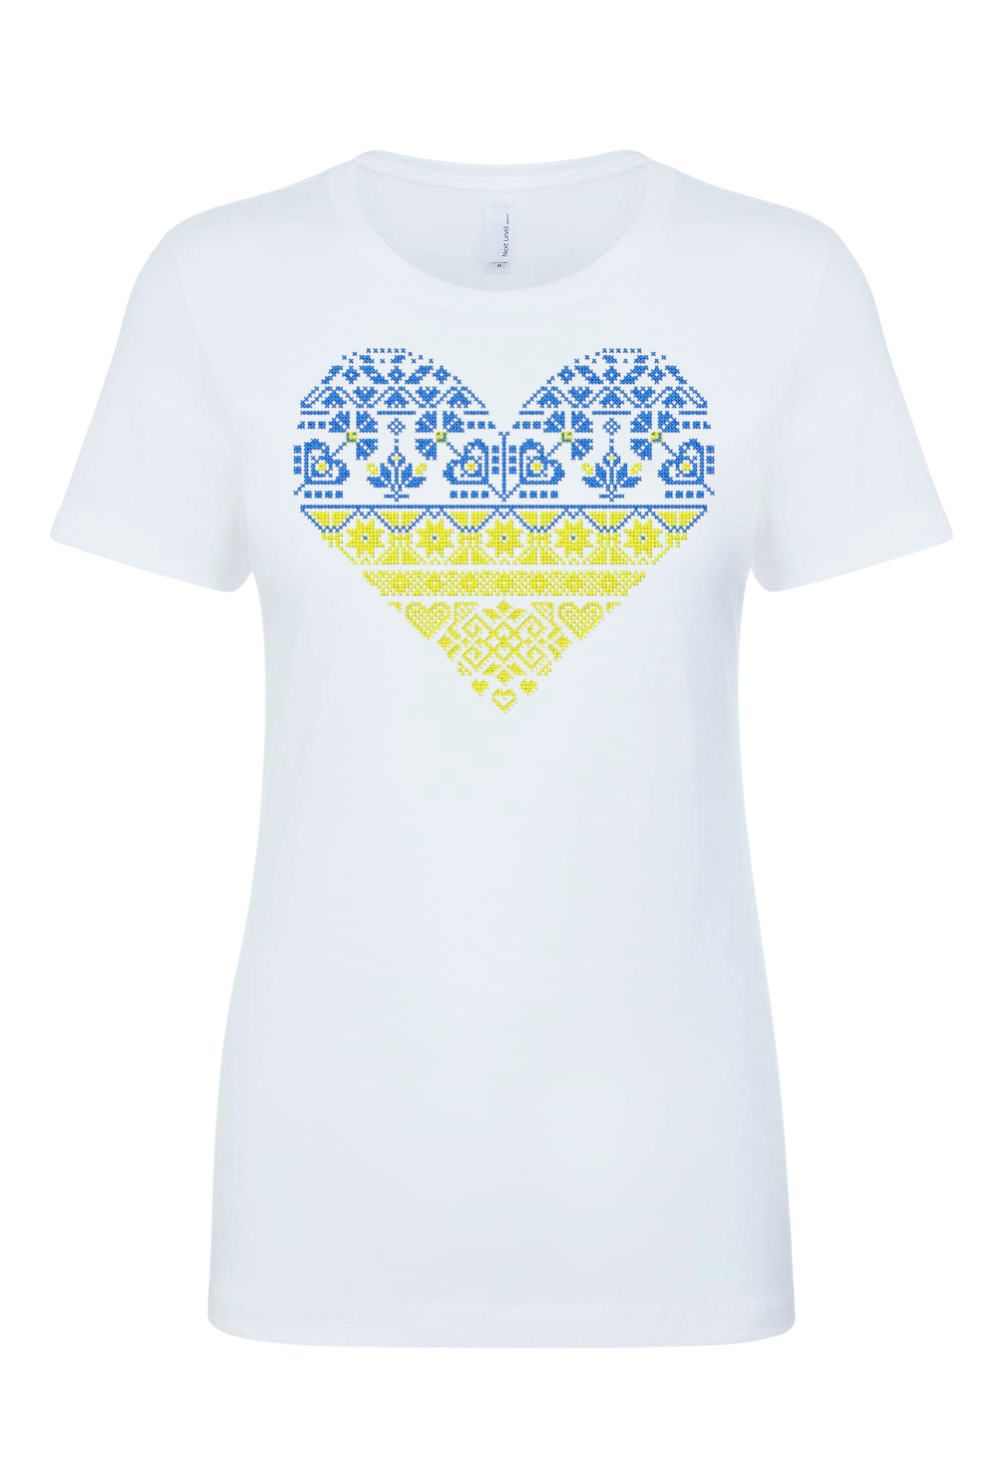 Female fit t-shirt "Blue and yellow heart"